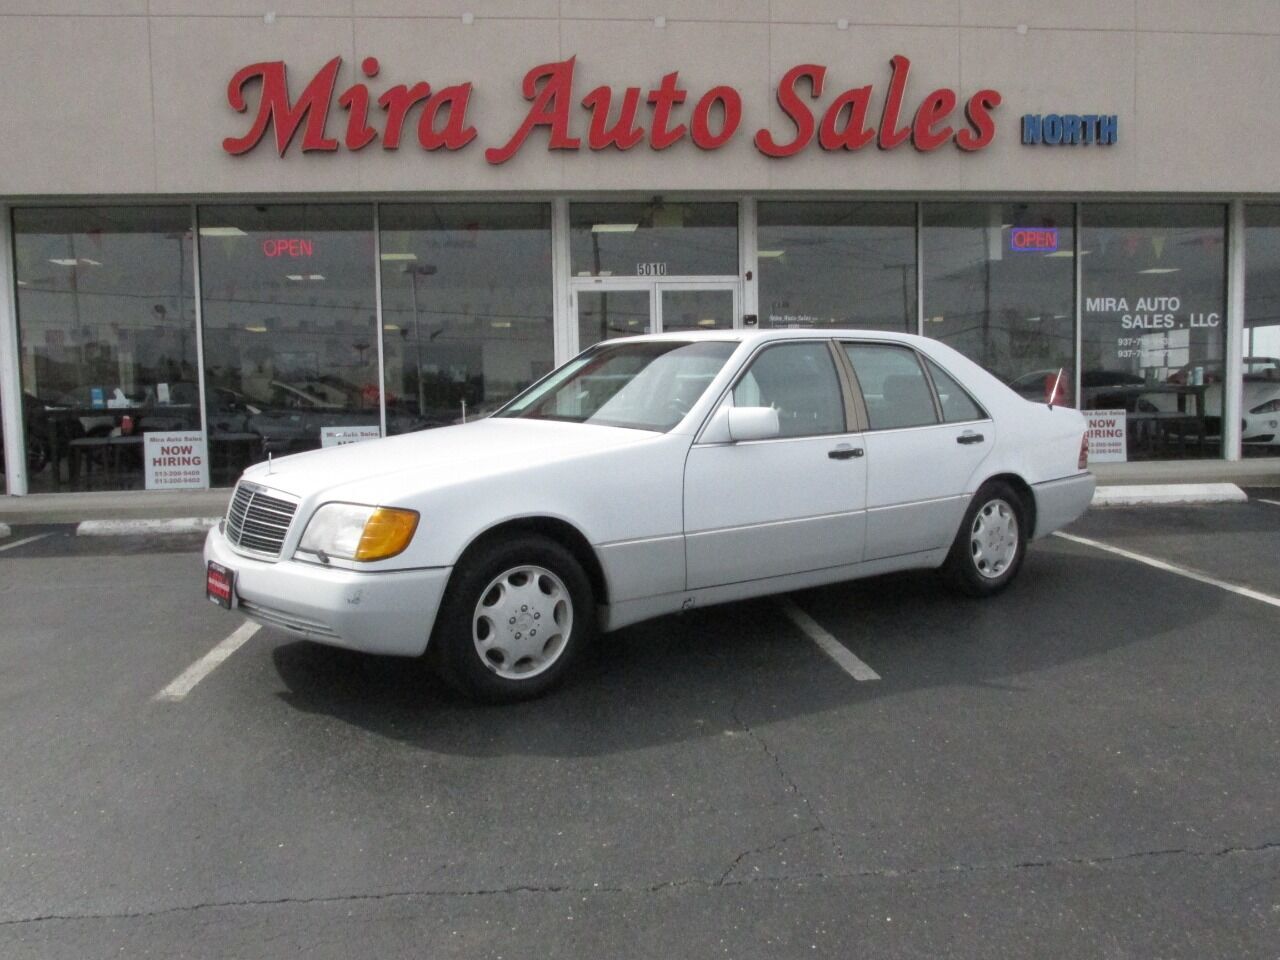 Mercedes Benz 400 Class For Sale In Germantown Oh ®